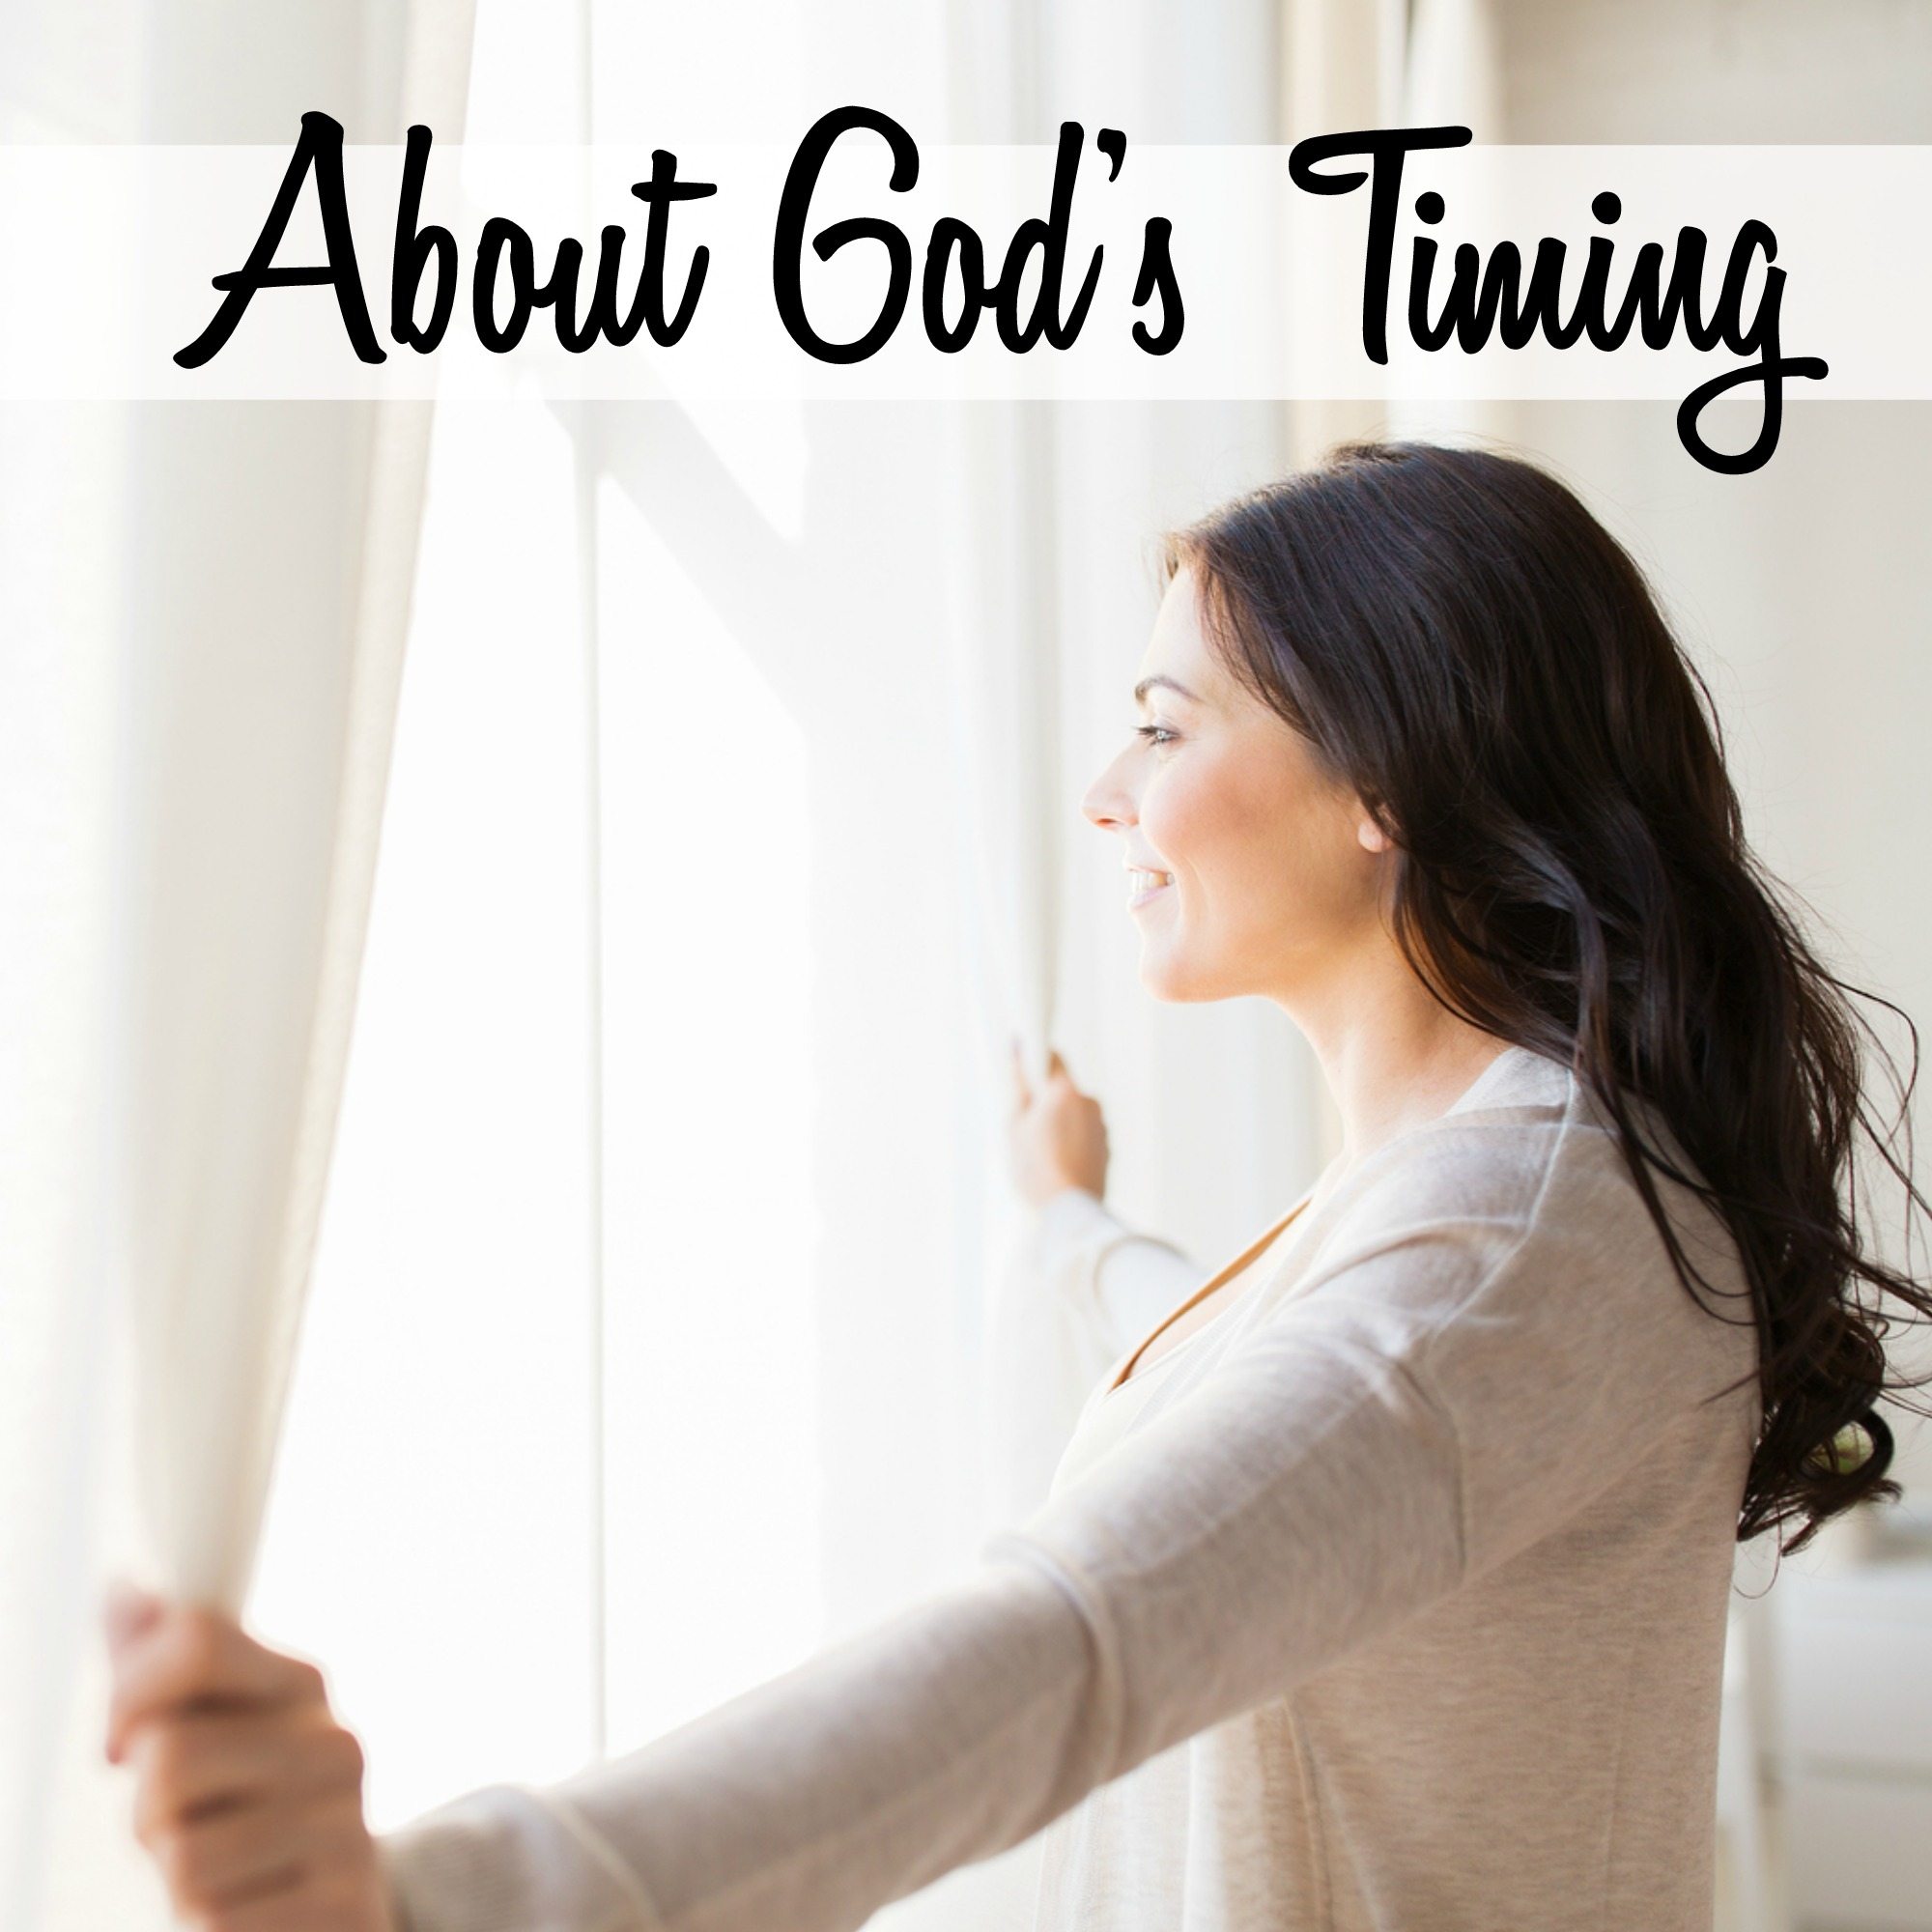 About God’s Timing…